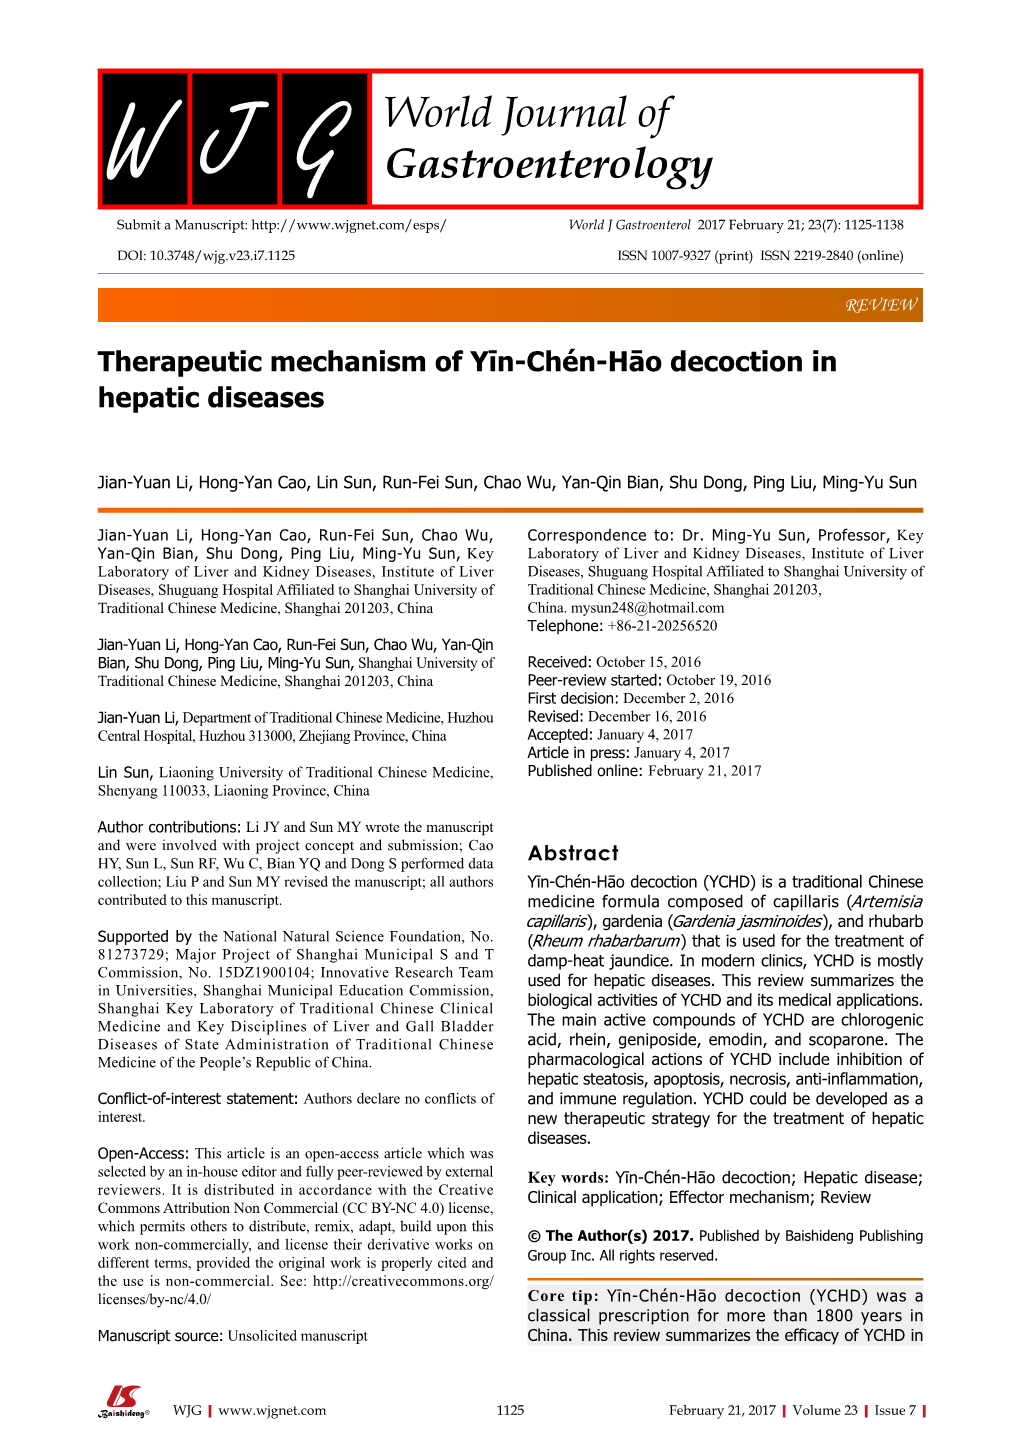 Therapeutic Mechanism of Yīn-Chén-Hāo Decoction in Hepatic Diseases